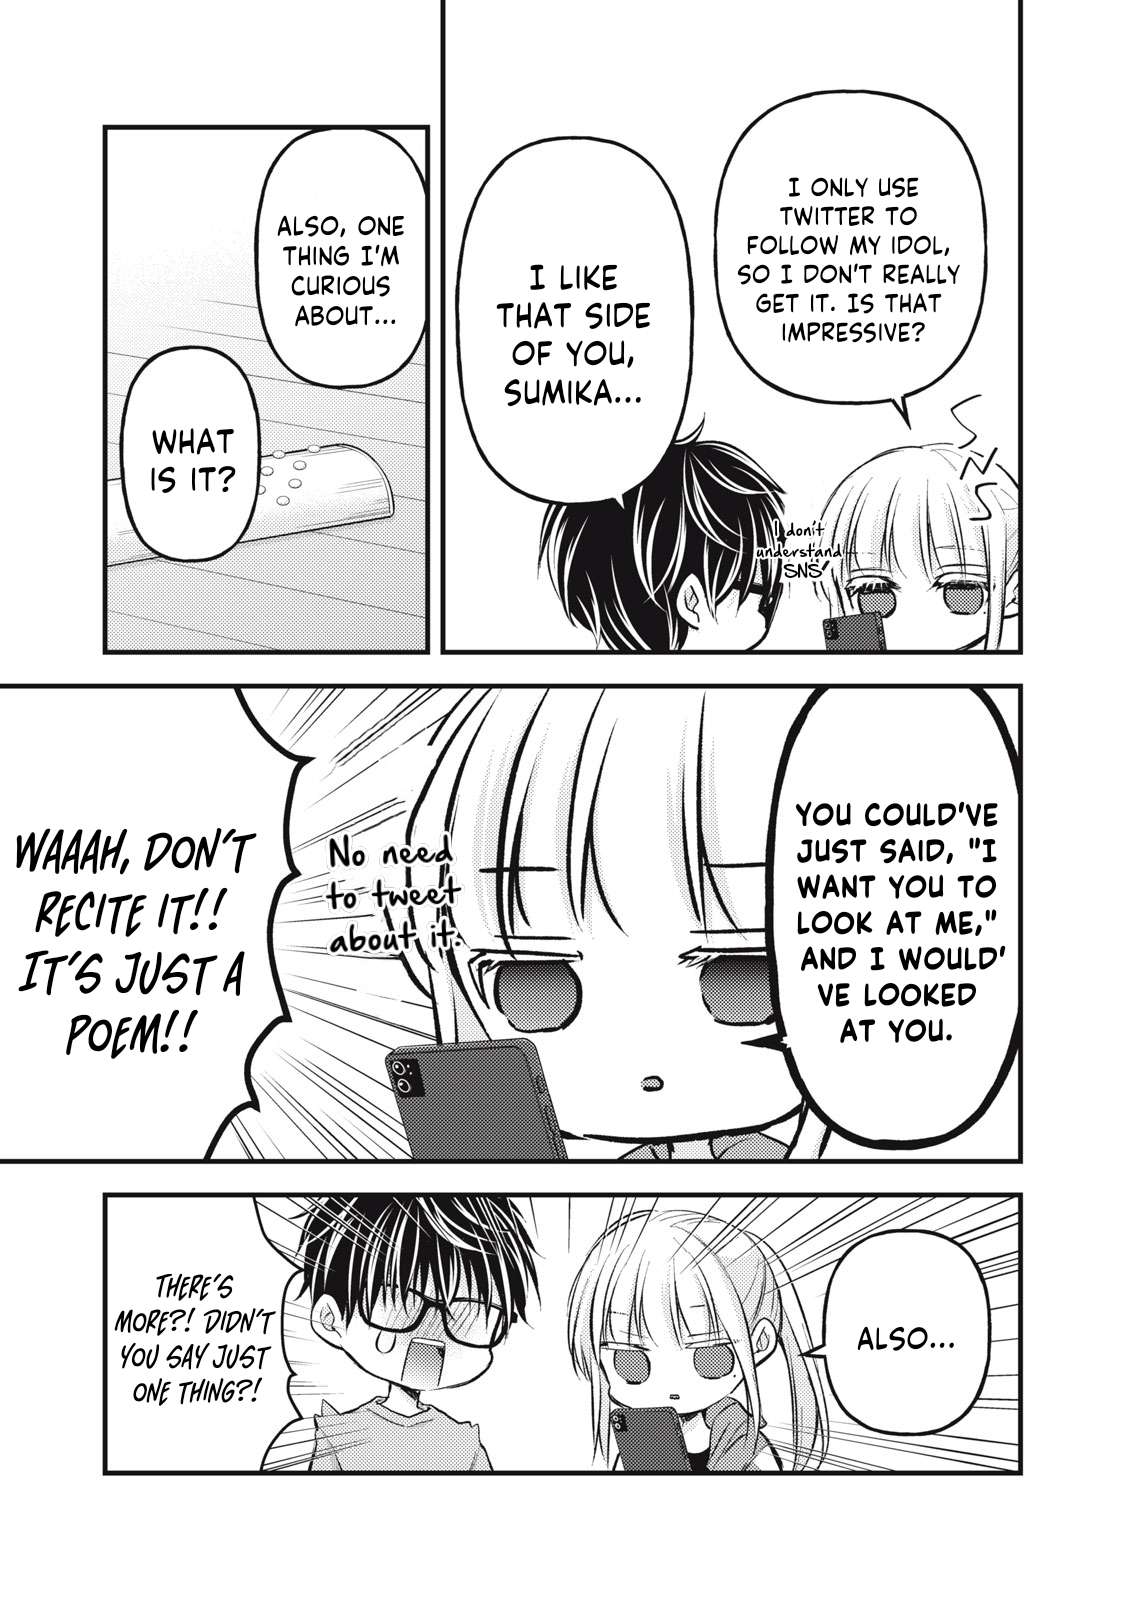 We May Be an Inexperienced Couple but... chapter 124 page 10